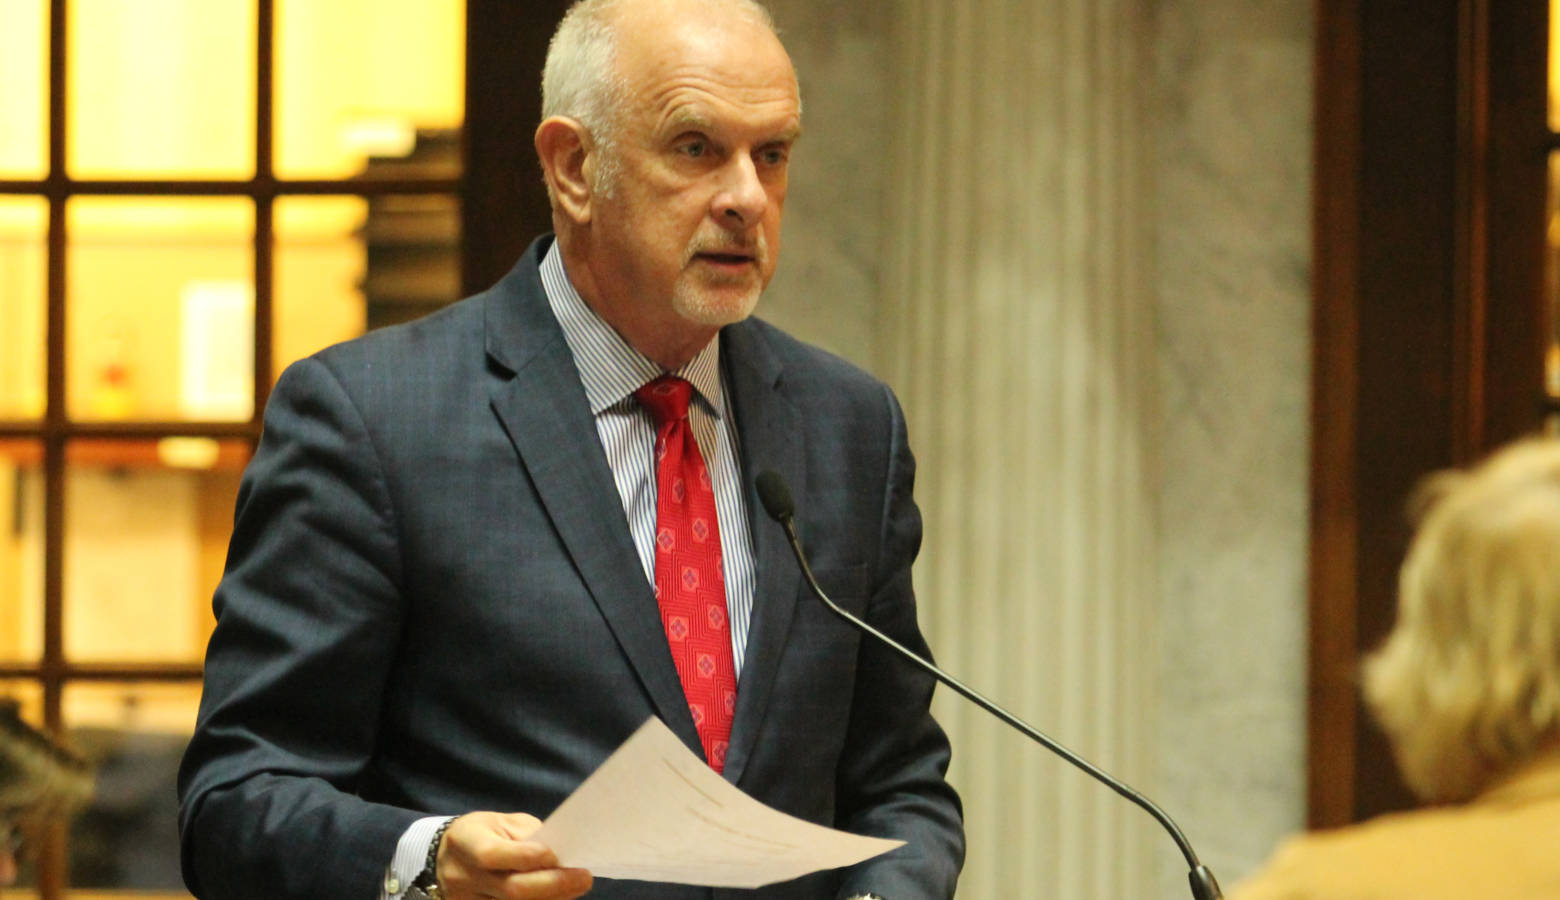 The bill authored by Sen. Travis Holdman (R-Markle) creates a long list of abortion complications that must be reported to the state. (Lauren Chapman/IPB News)